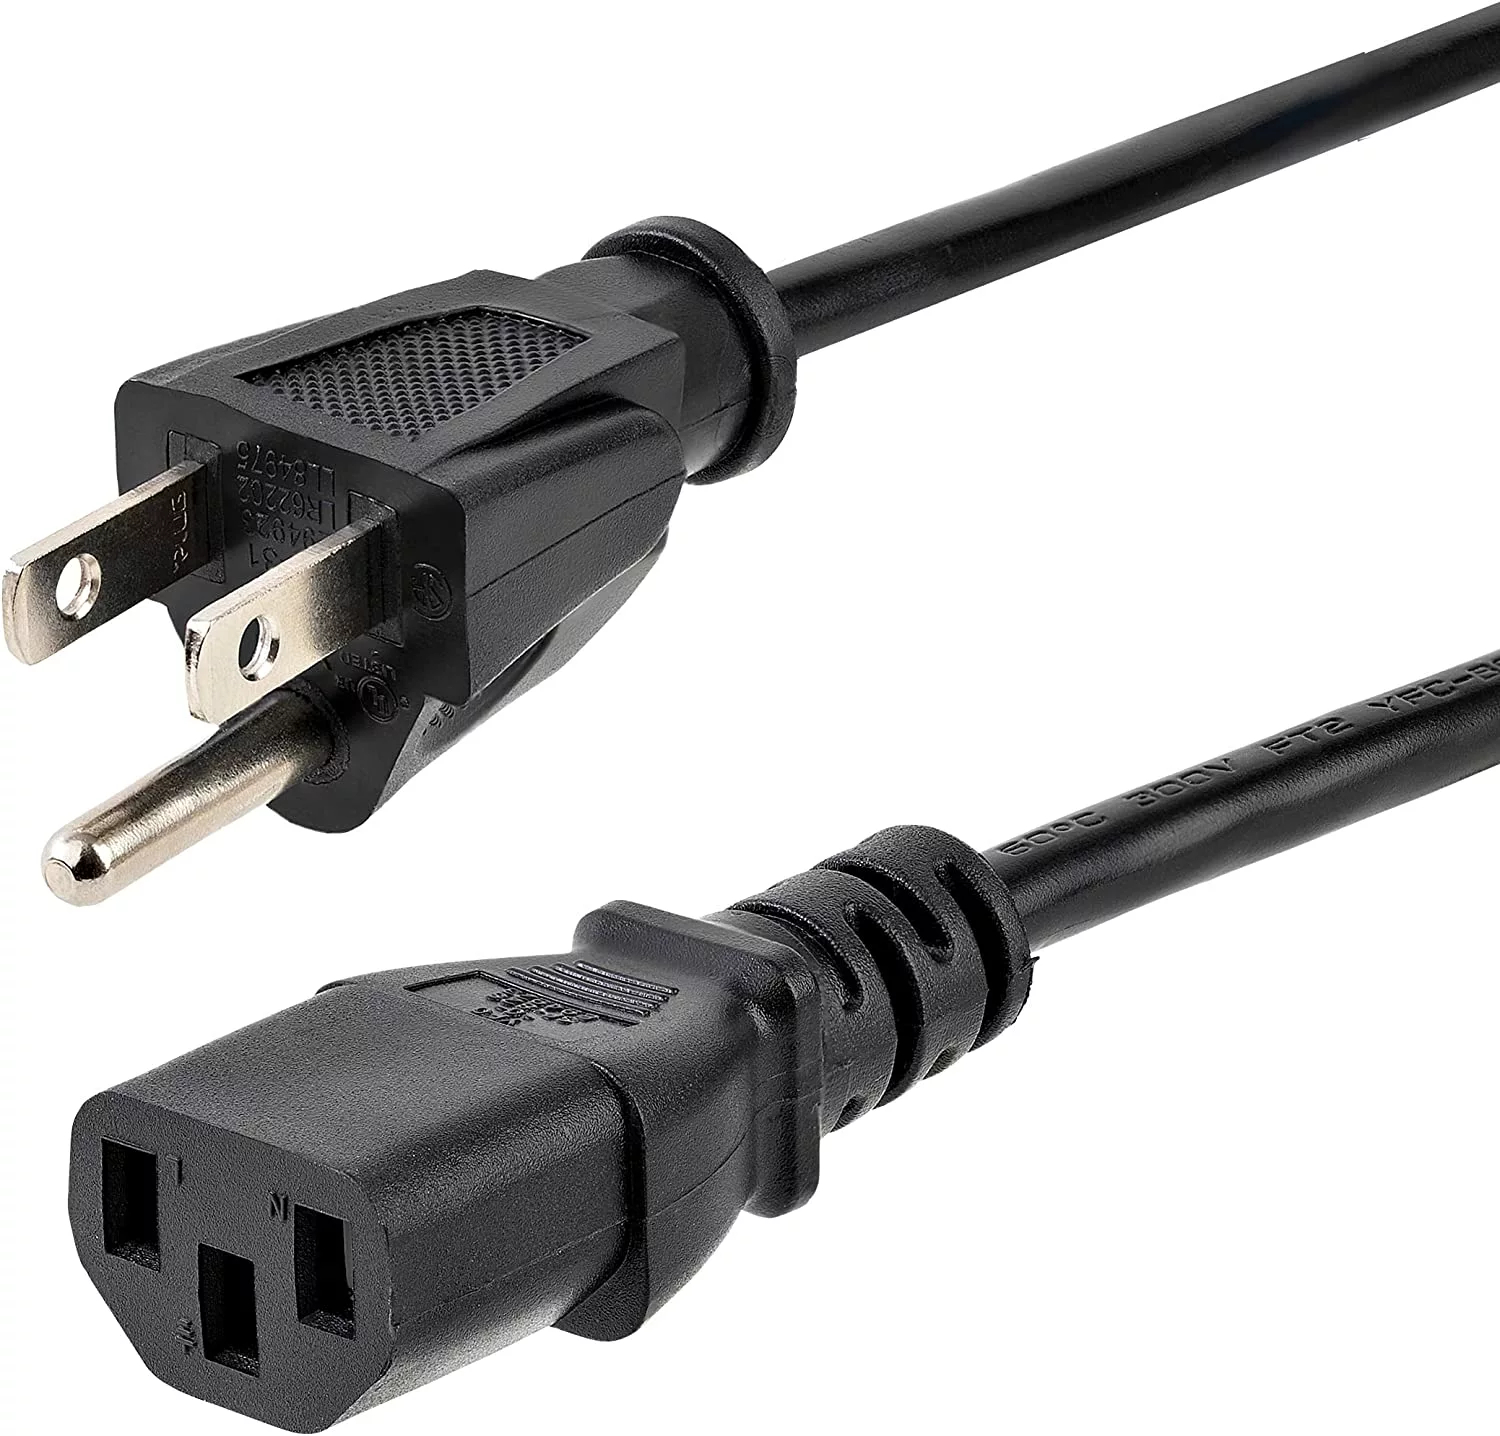 Startech.com 1ft (30m) computer power cord, nema 5-15p to c13, 10a 125v, 18awg, black replacement ac power cord, printer power cord, pc power supply cable, monitor power cable - ul listed (pxt1011)